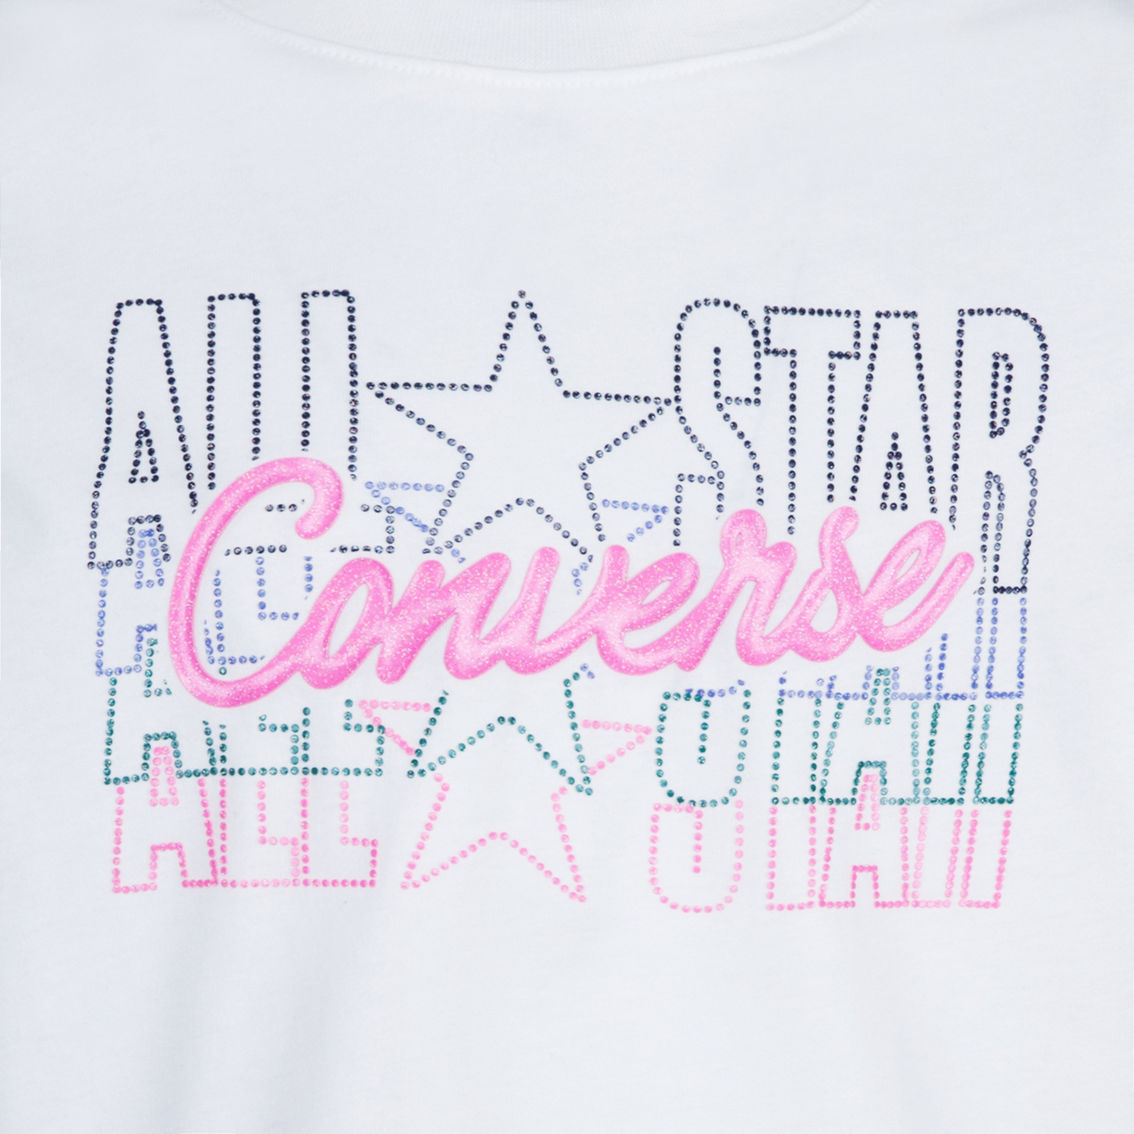 Converse Girls Graphic Tee - Image 3 of 3